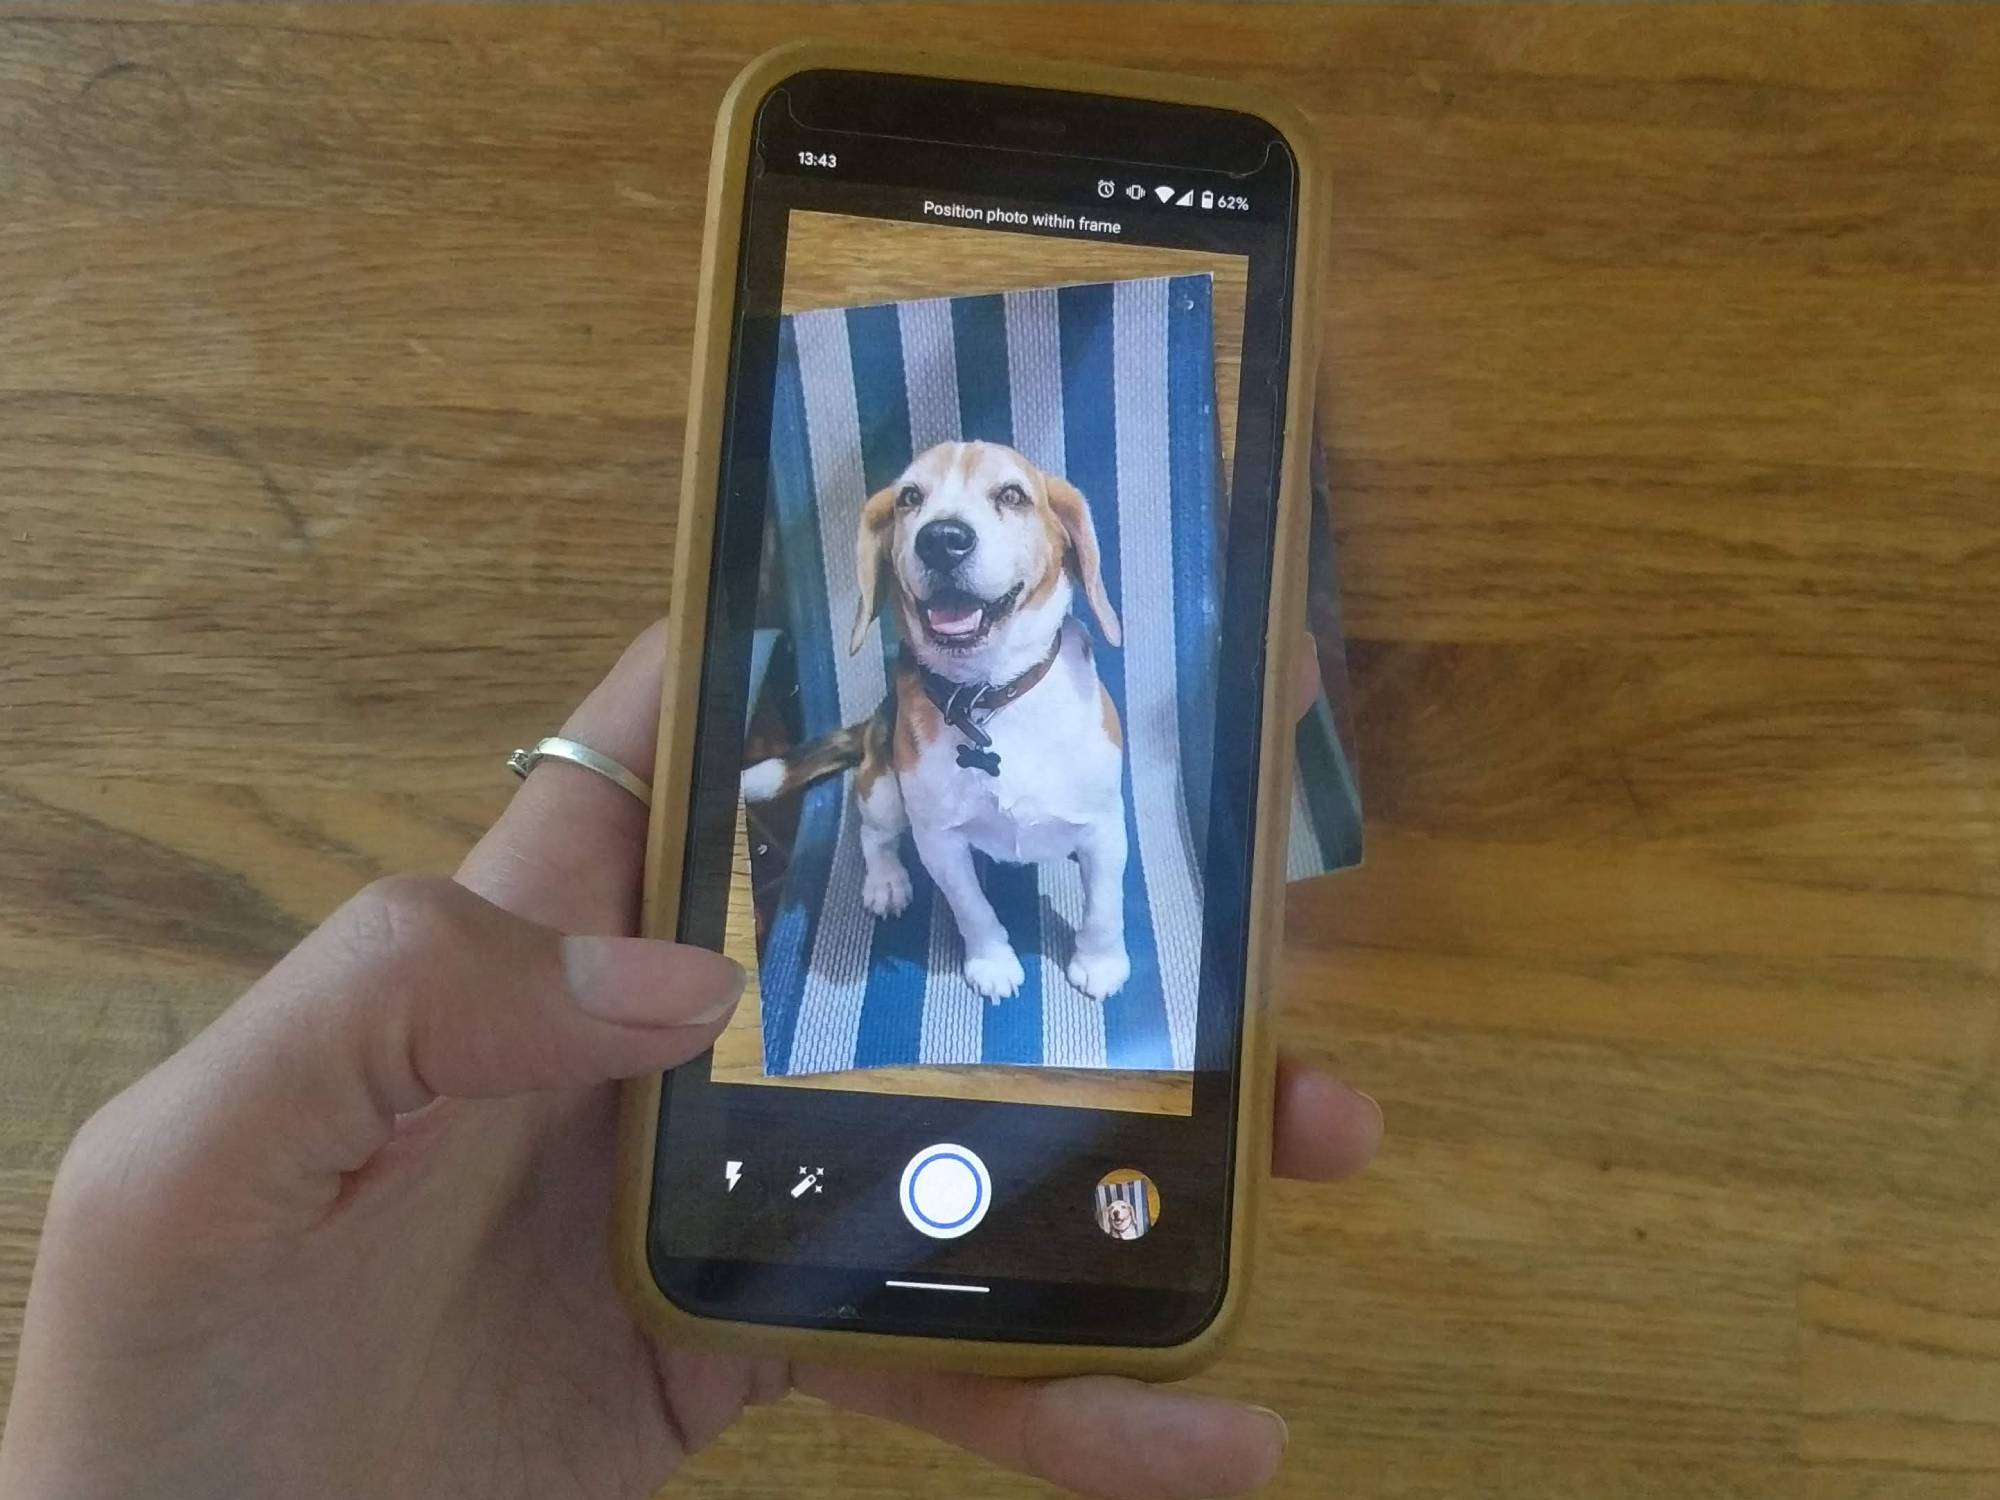 Can you scan an image with your phone?